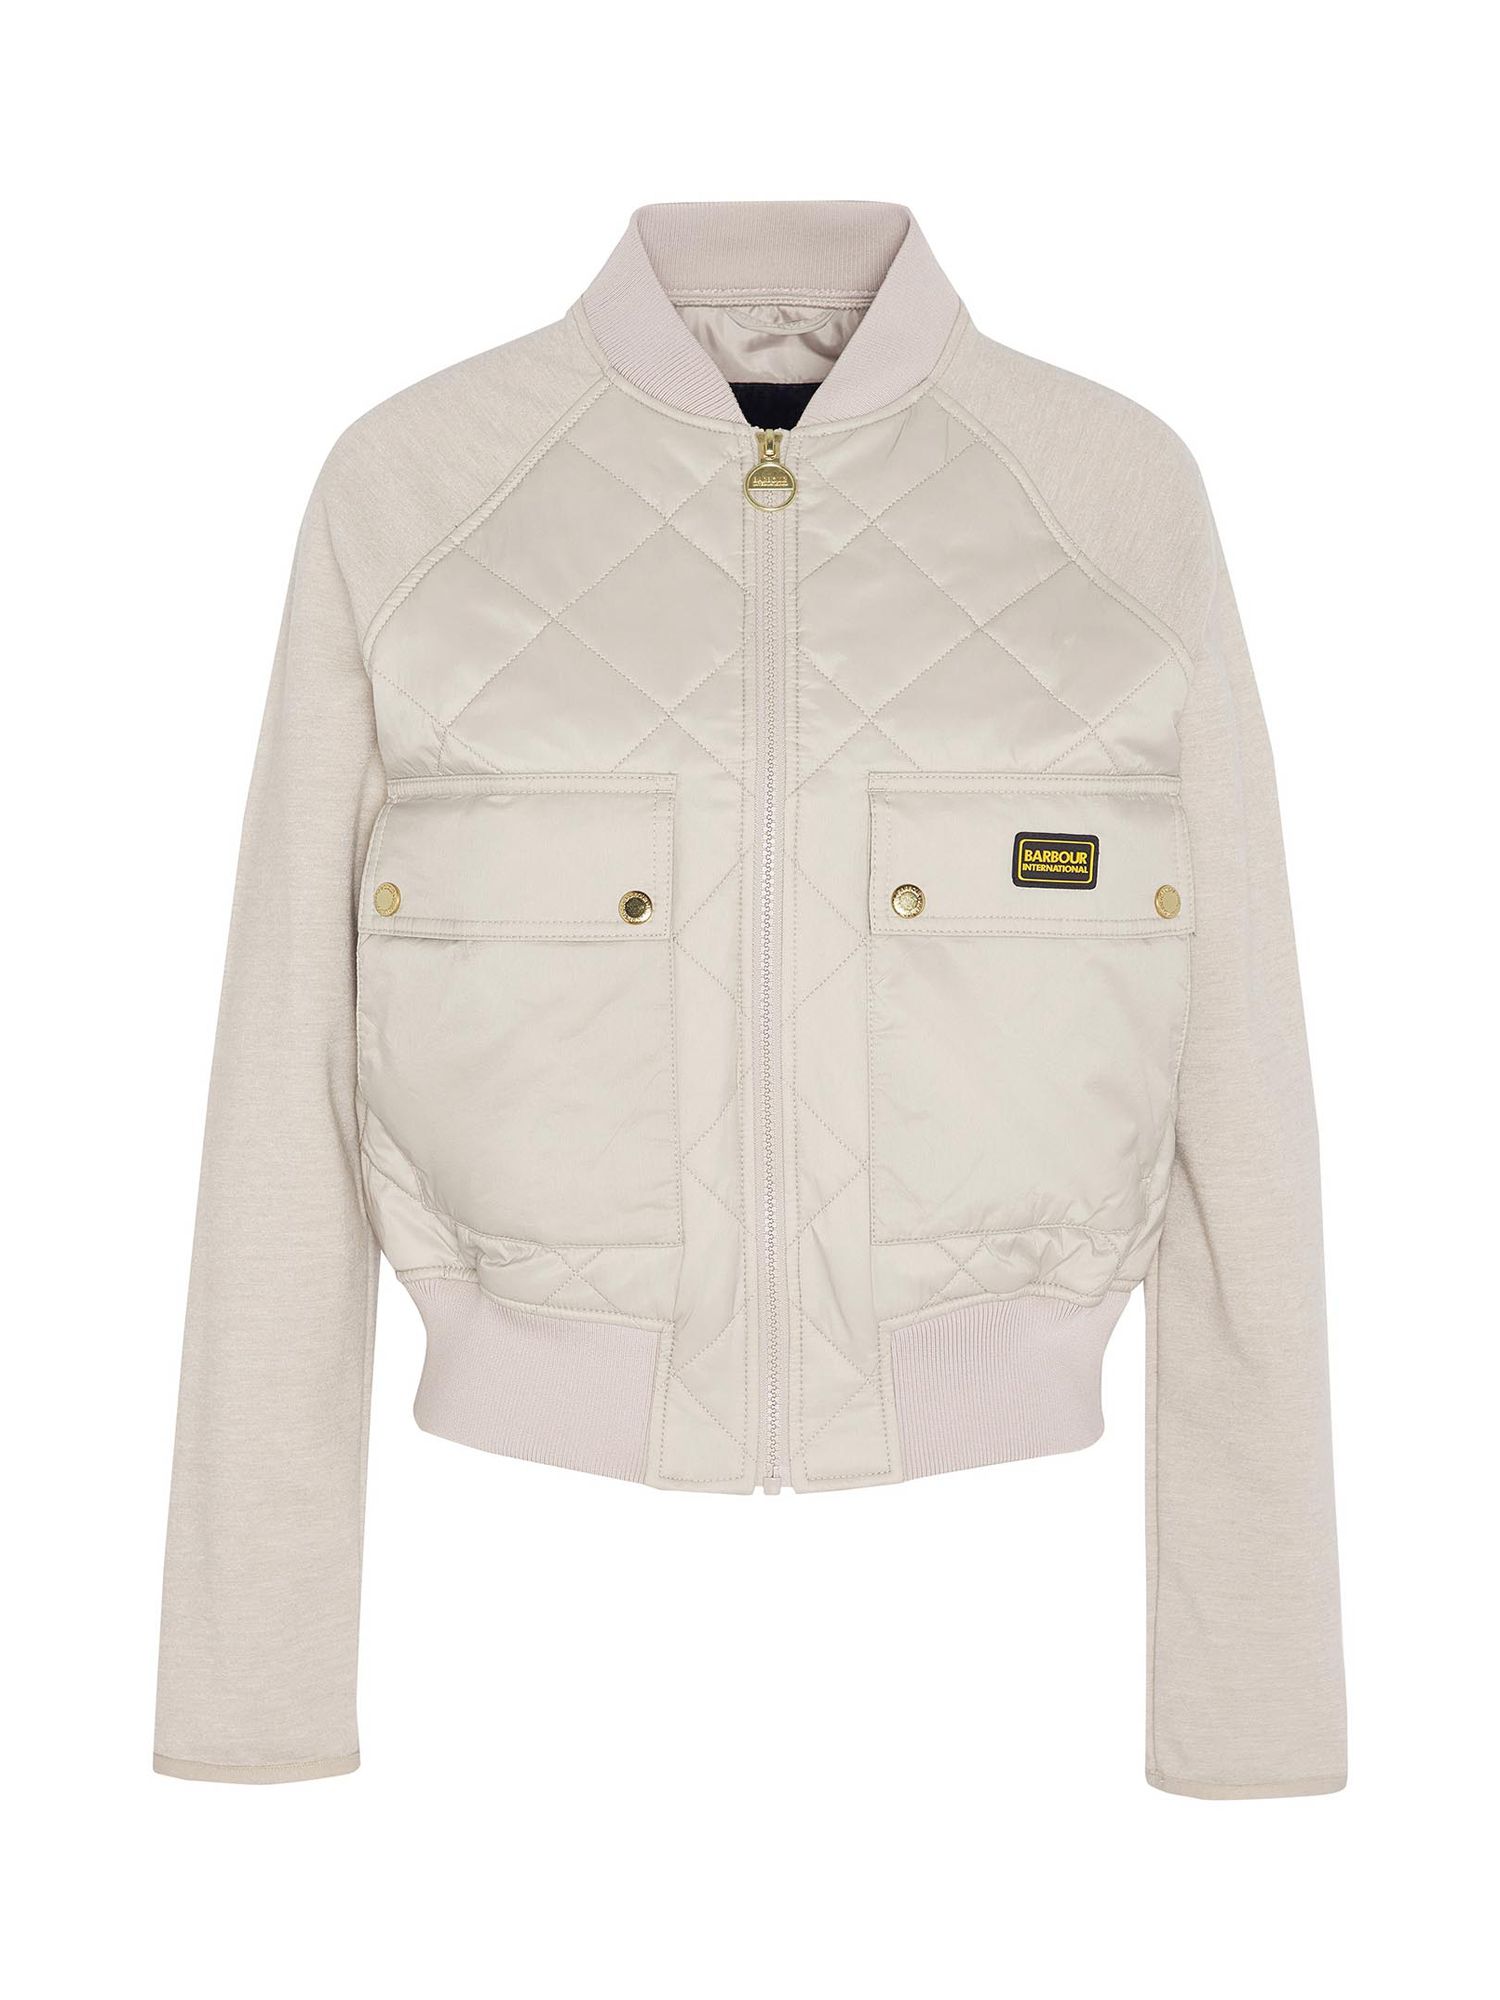 Barbour International Wilson Quilted Jacket, Oat at John Lewis & Partners